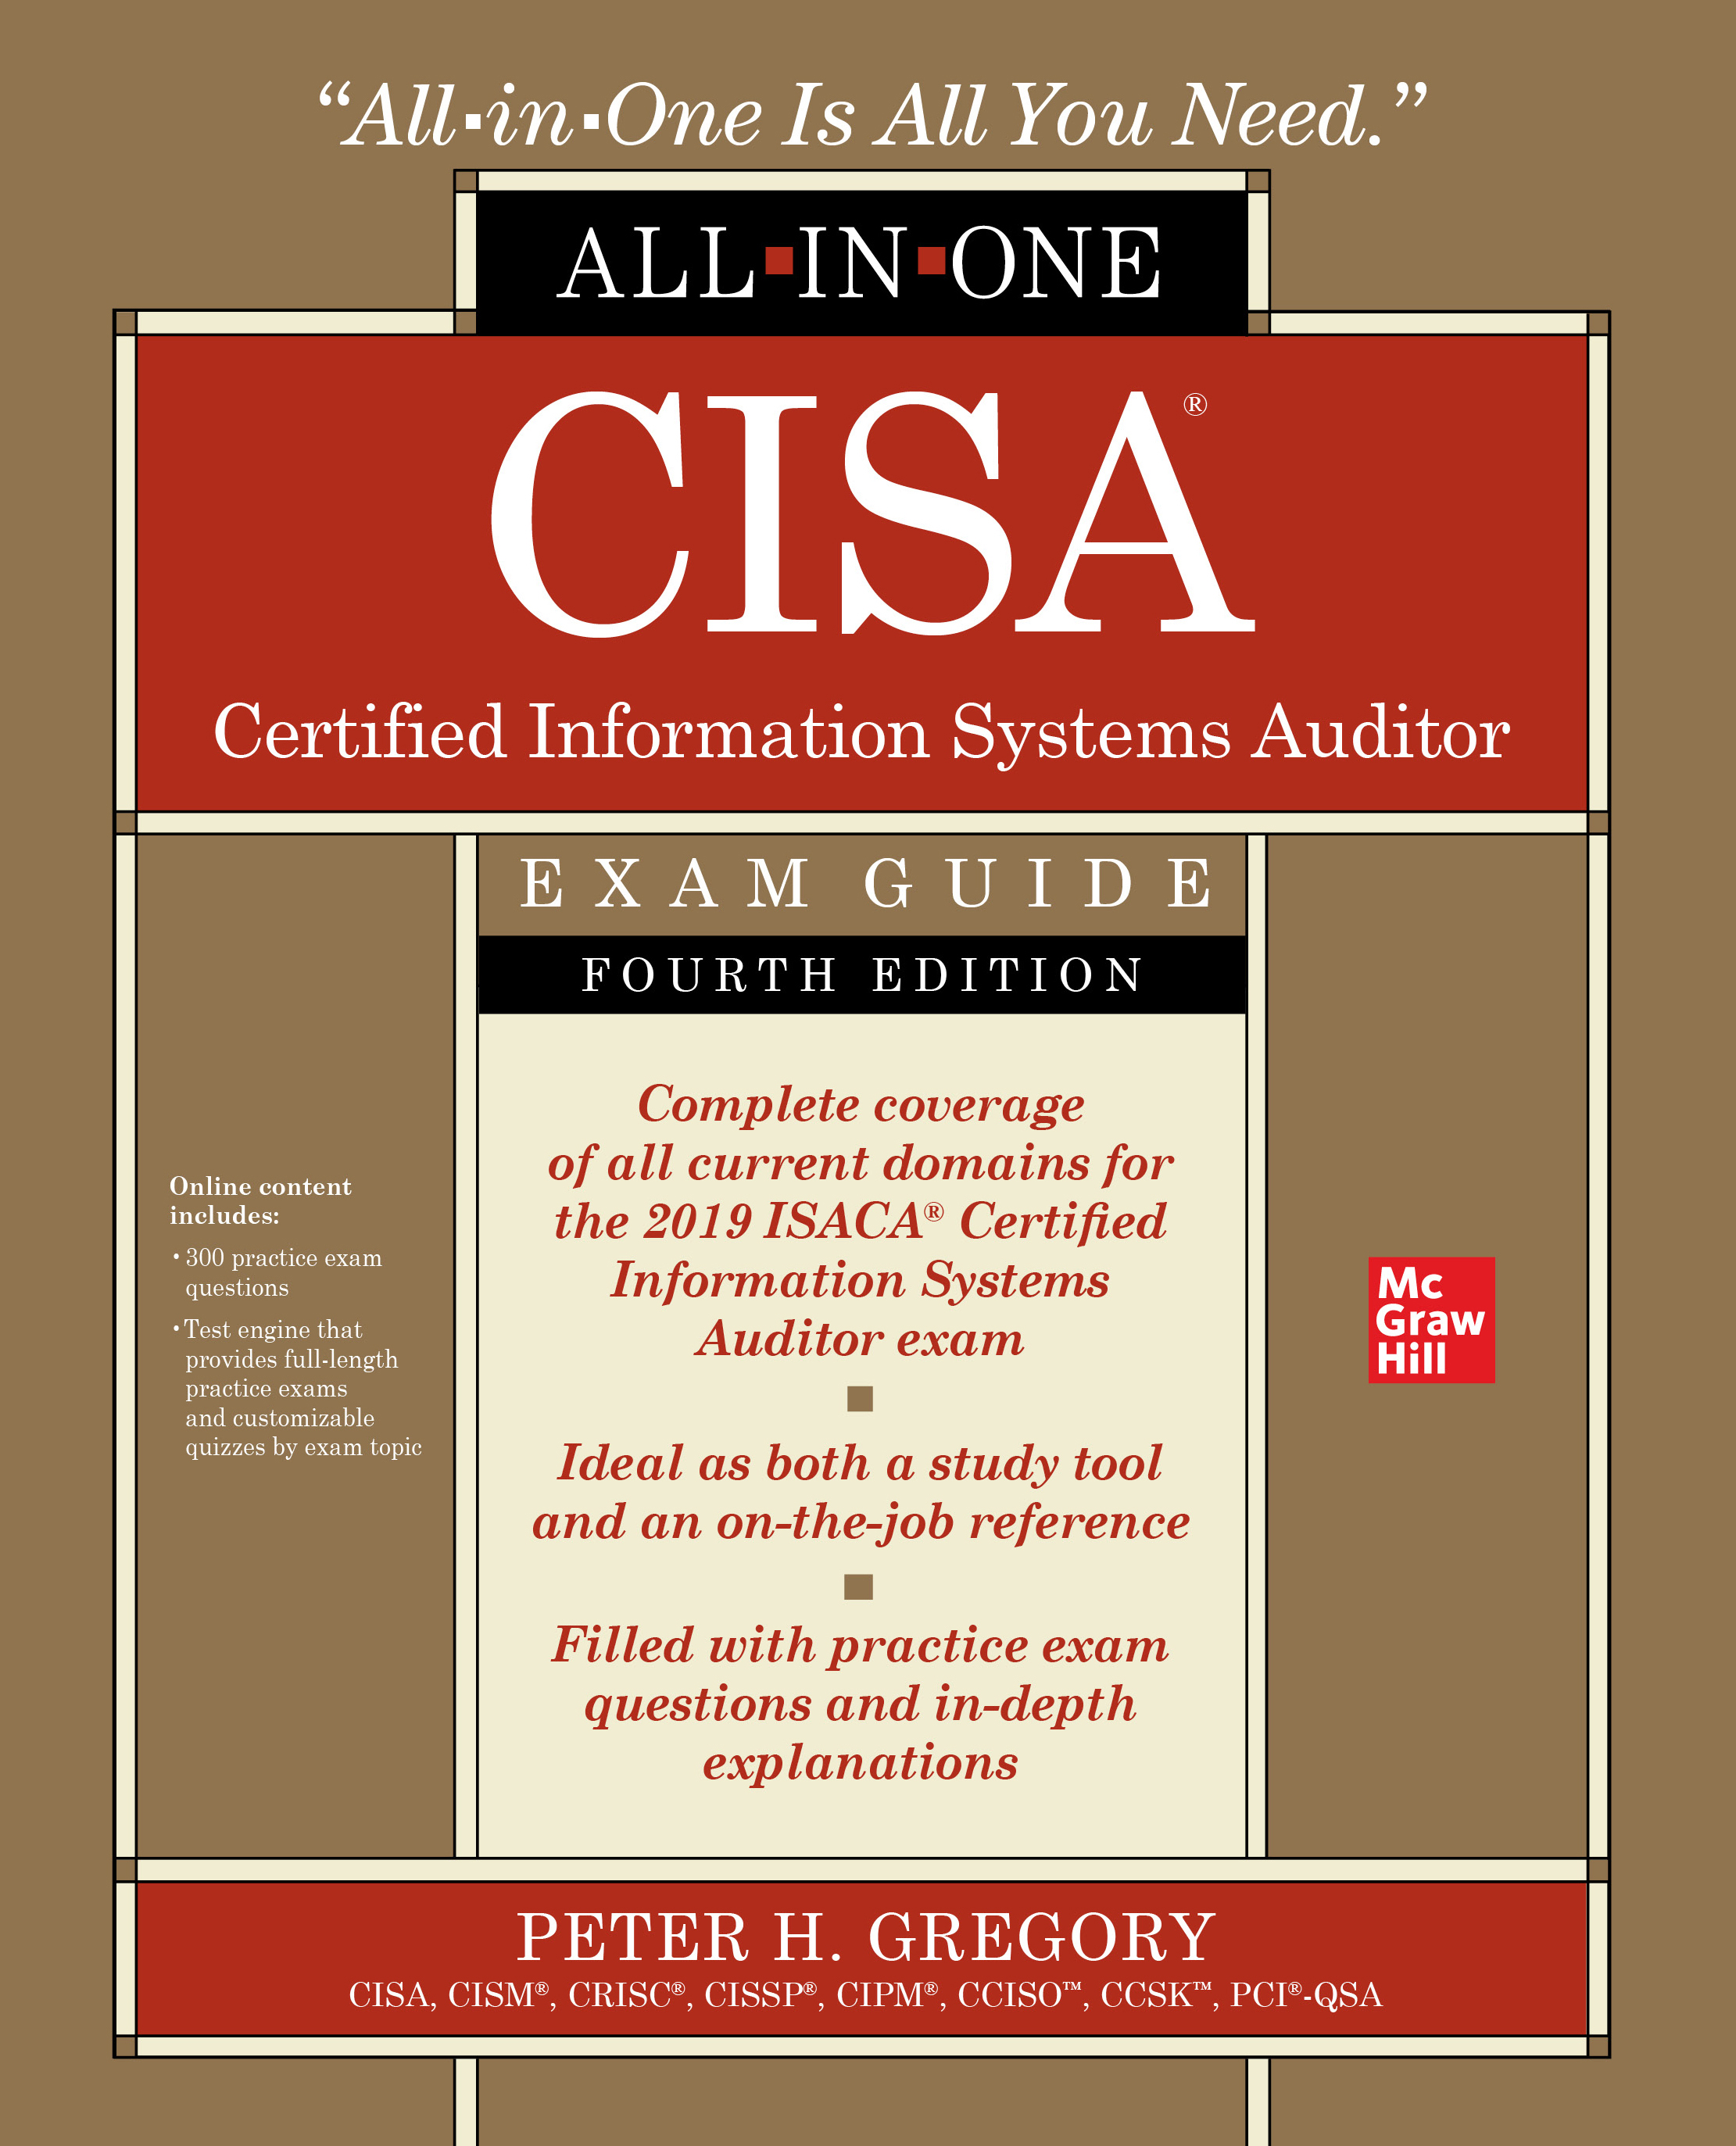 Cism certified information security manager all-in-one exam guide pdf download ghostbusters the video game 2009 pc download